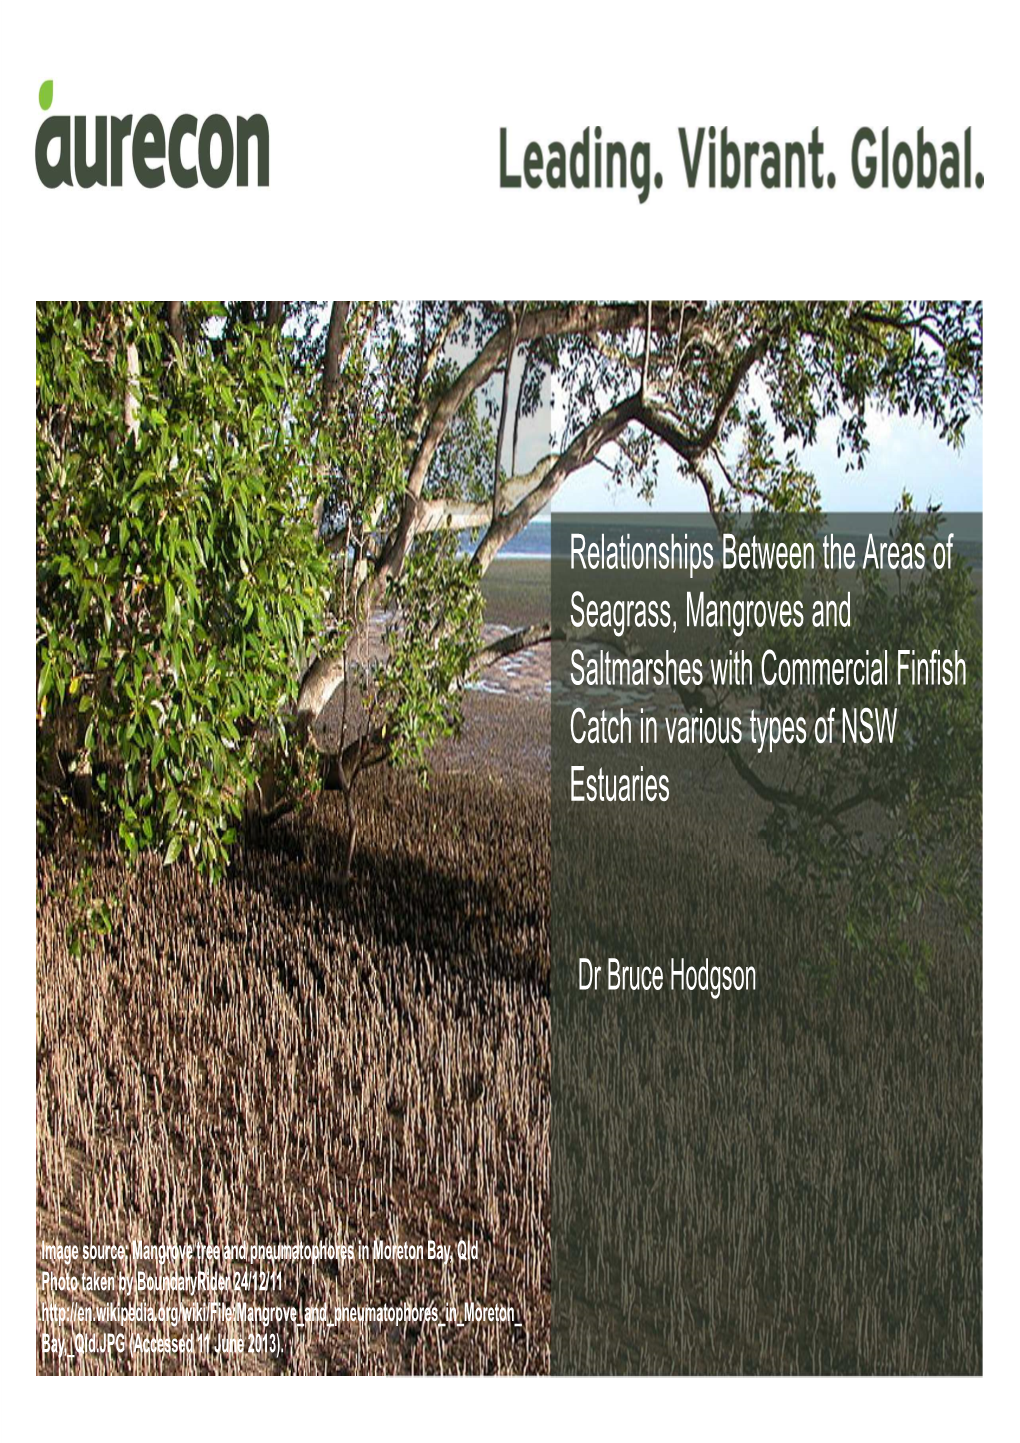 Relationships Between the Areas of Seagrass, Mangroves and Saltmarshes with Commercial Finfish Catch in Various Types of NSW Estuaries